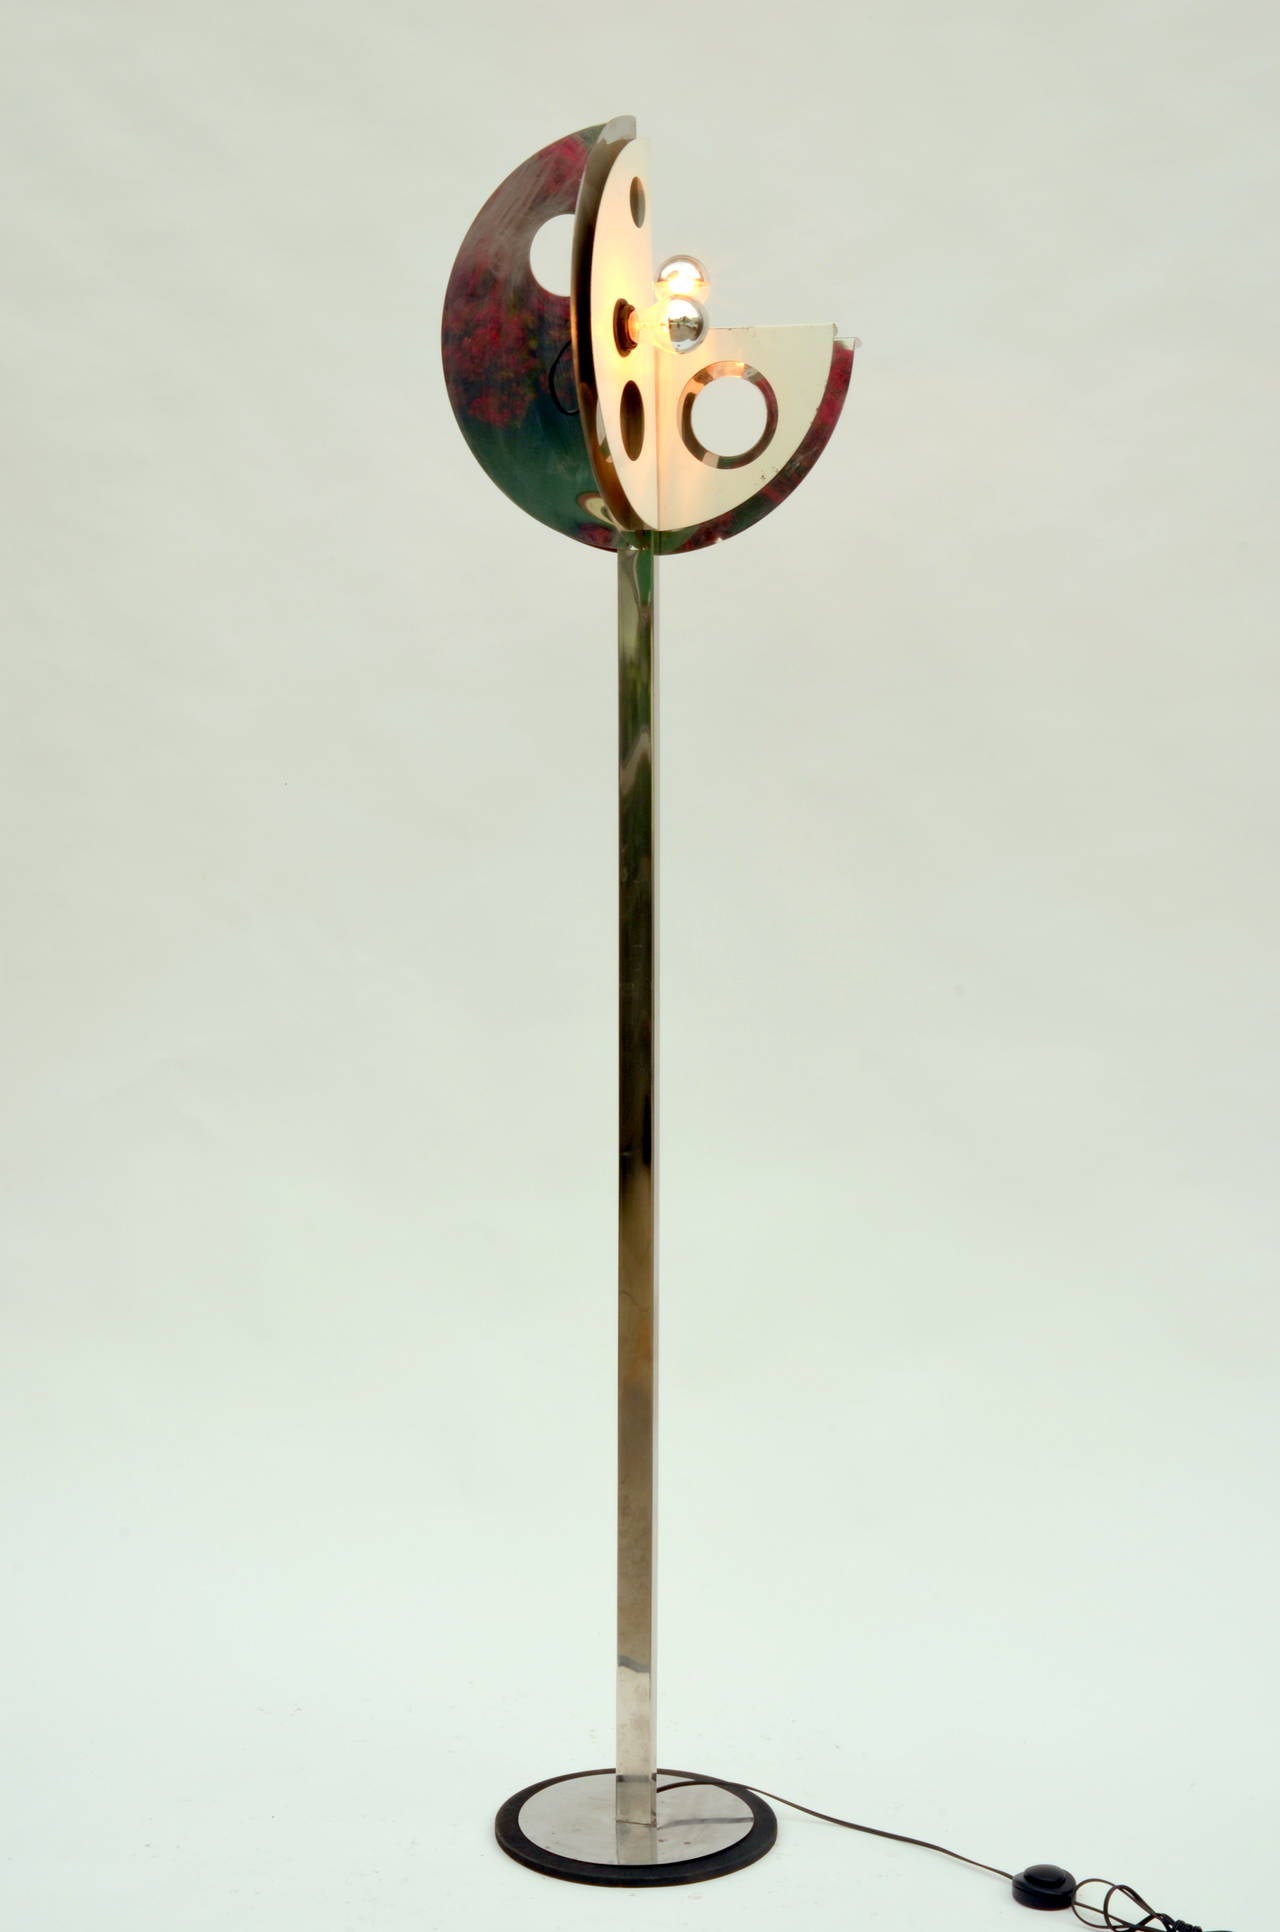 Unusual 1970s floor lamp in the style of Yonel Lebovici.